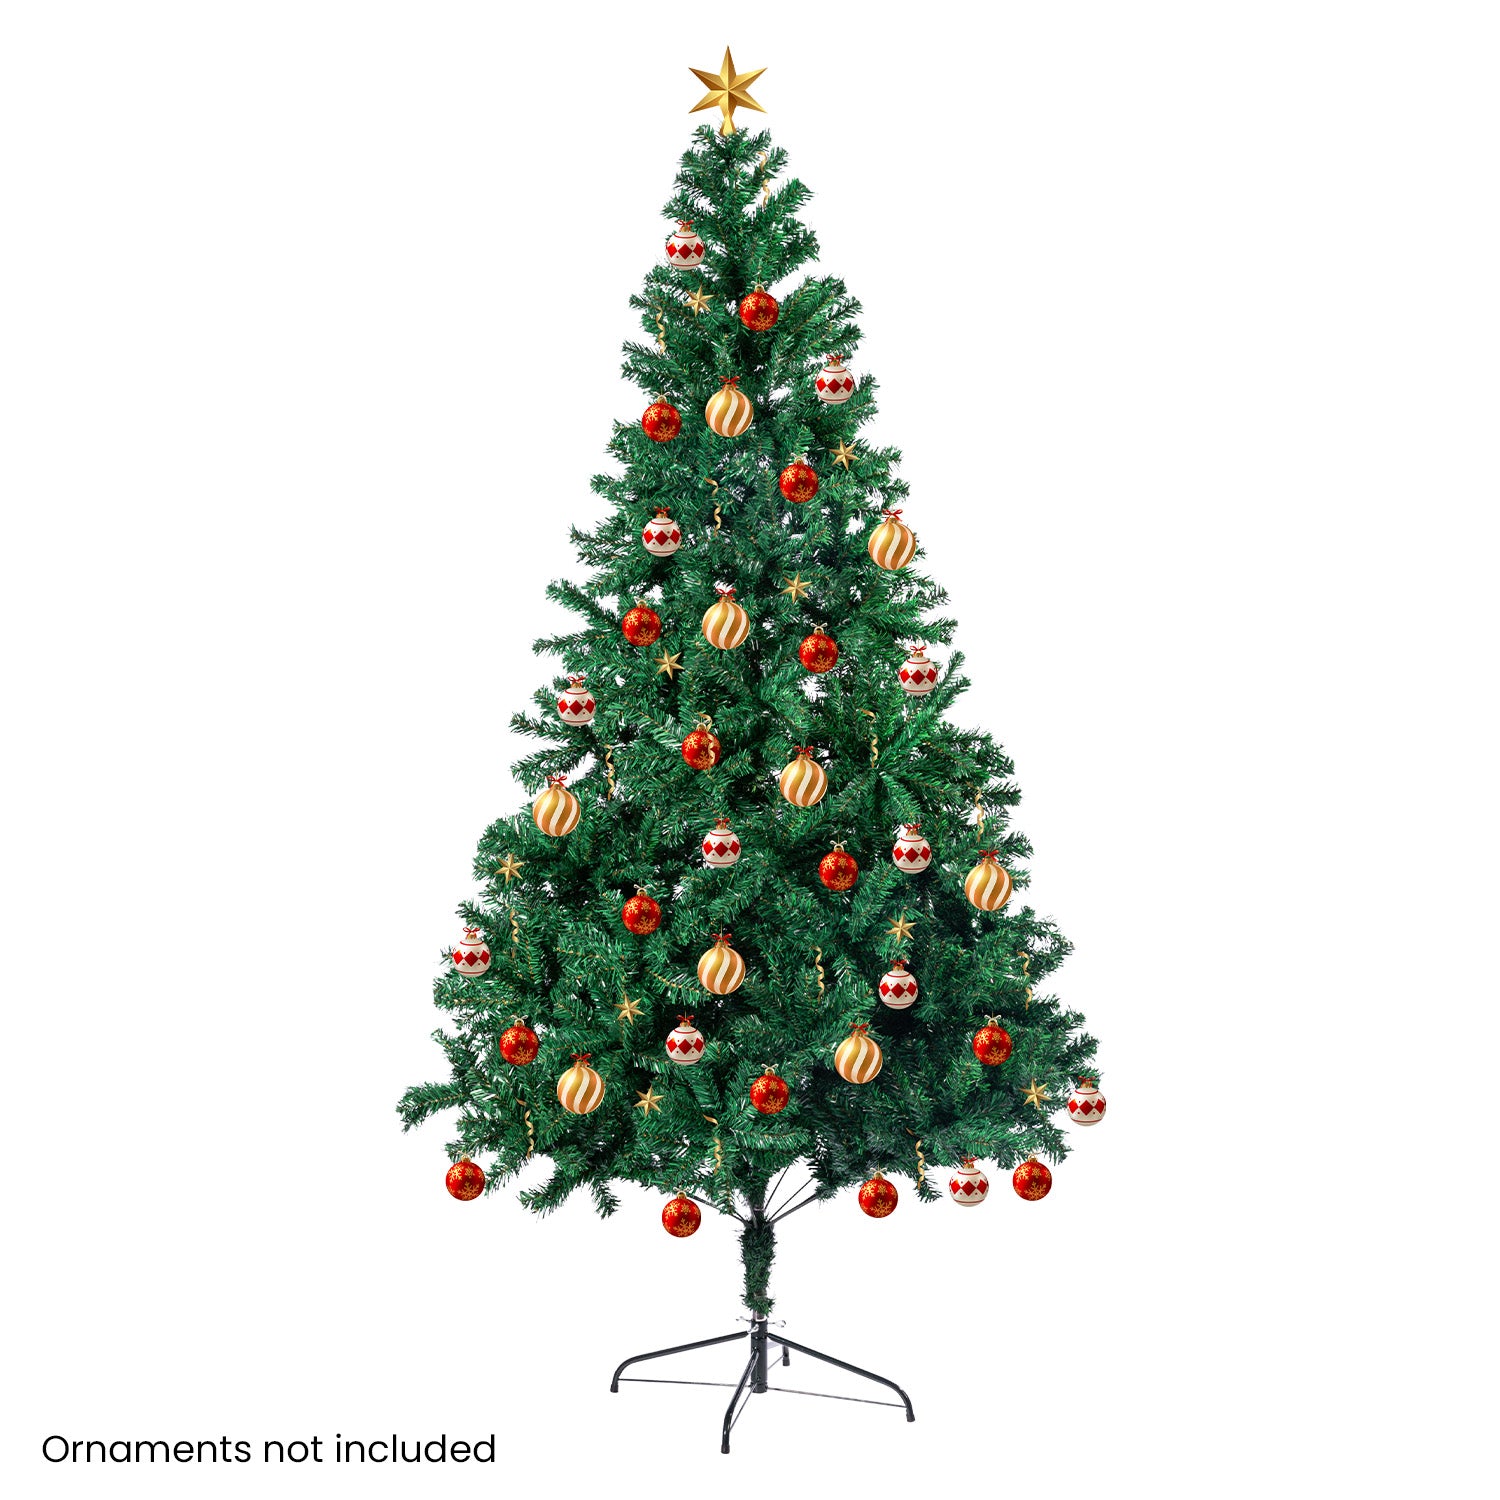 Christabelle Green Christmas Tree 1.8m Xmas Decor Decorations - 850 Tips - SILBERSHELL